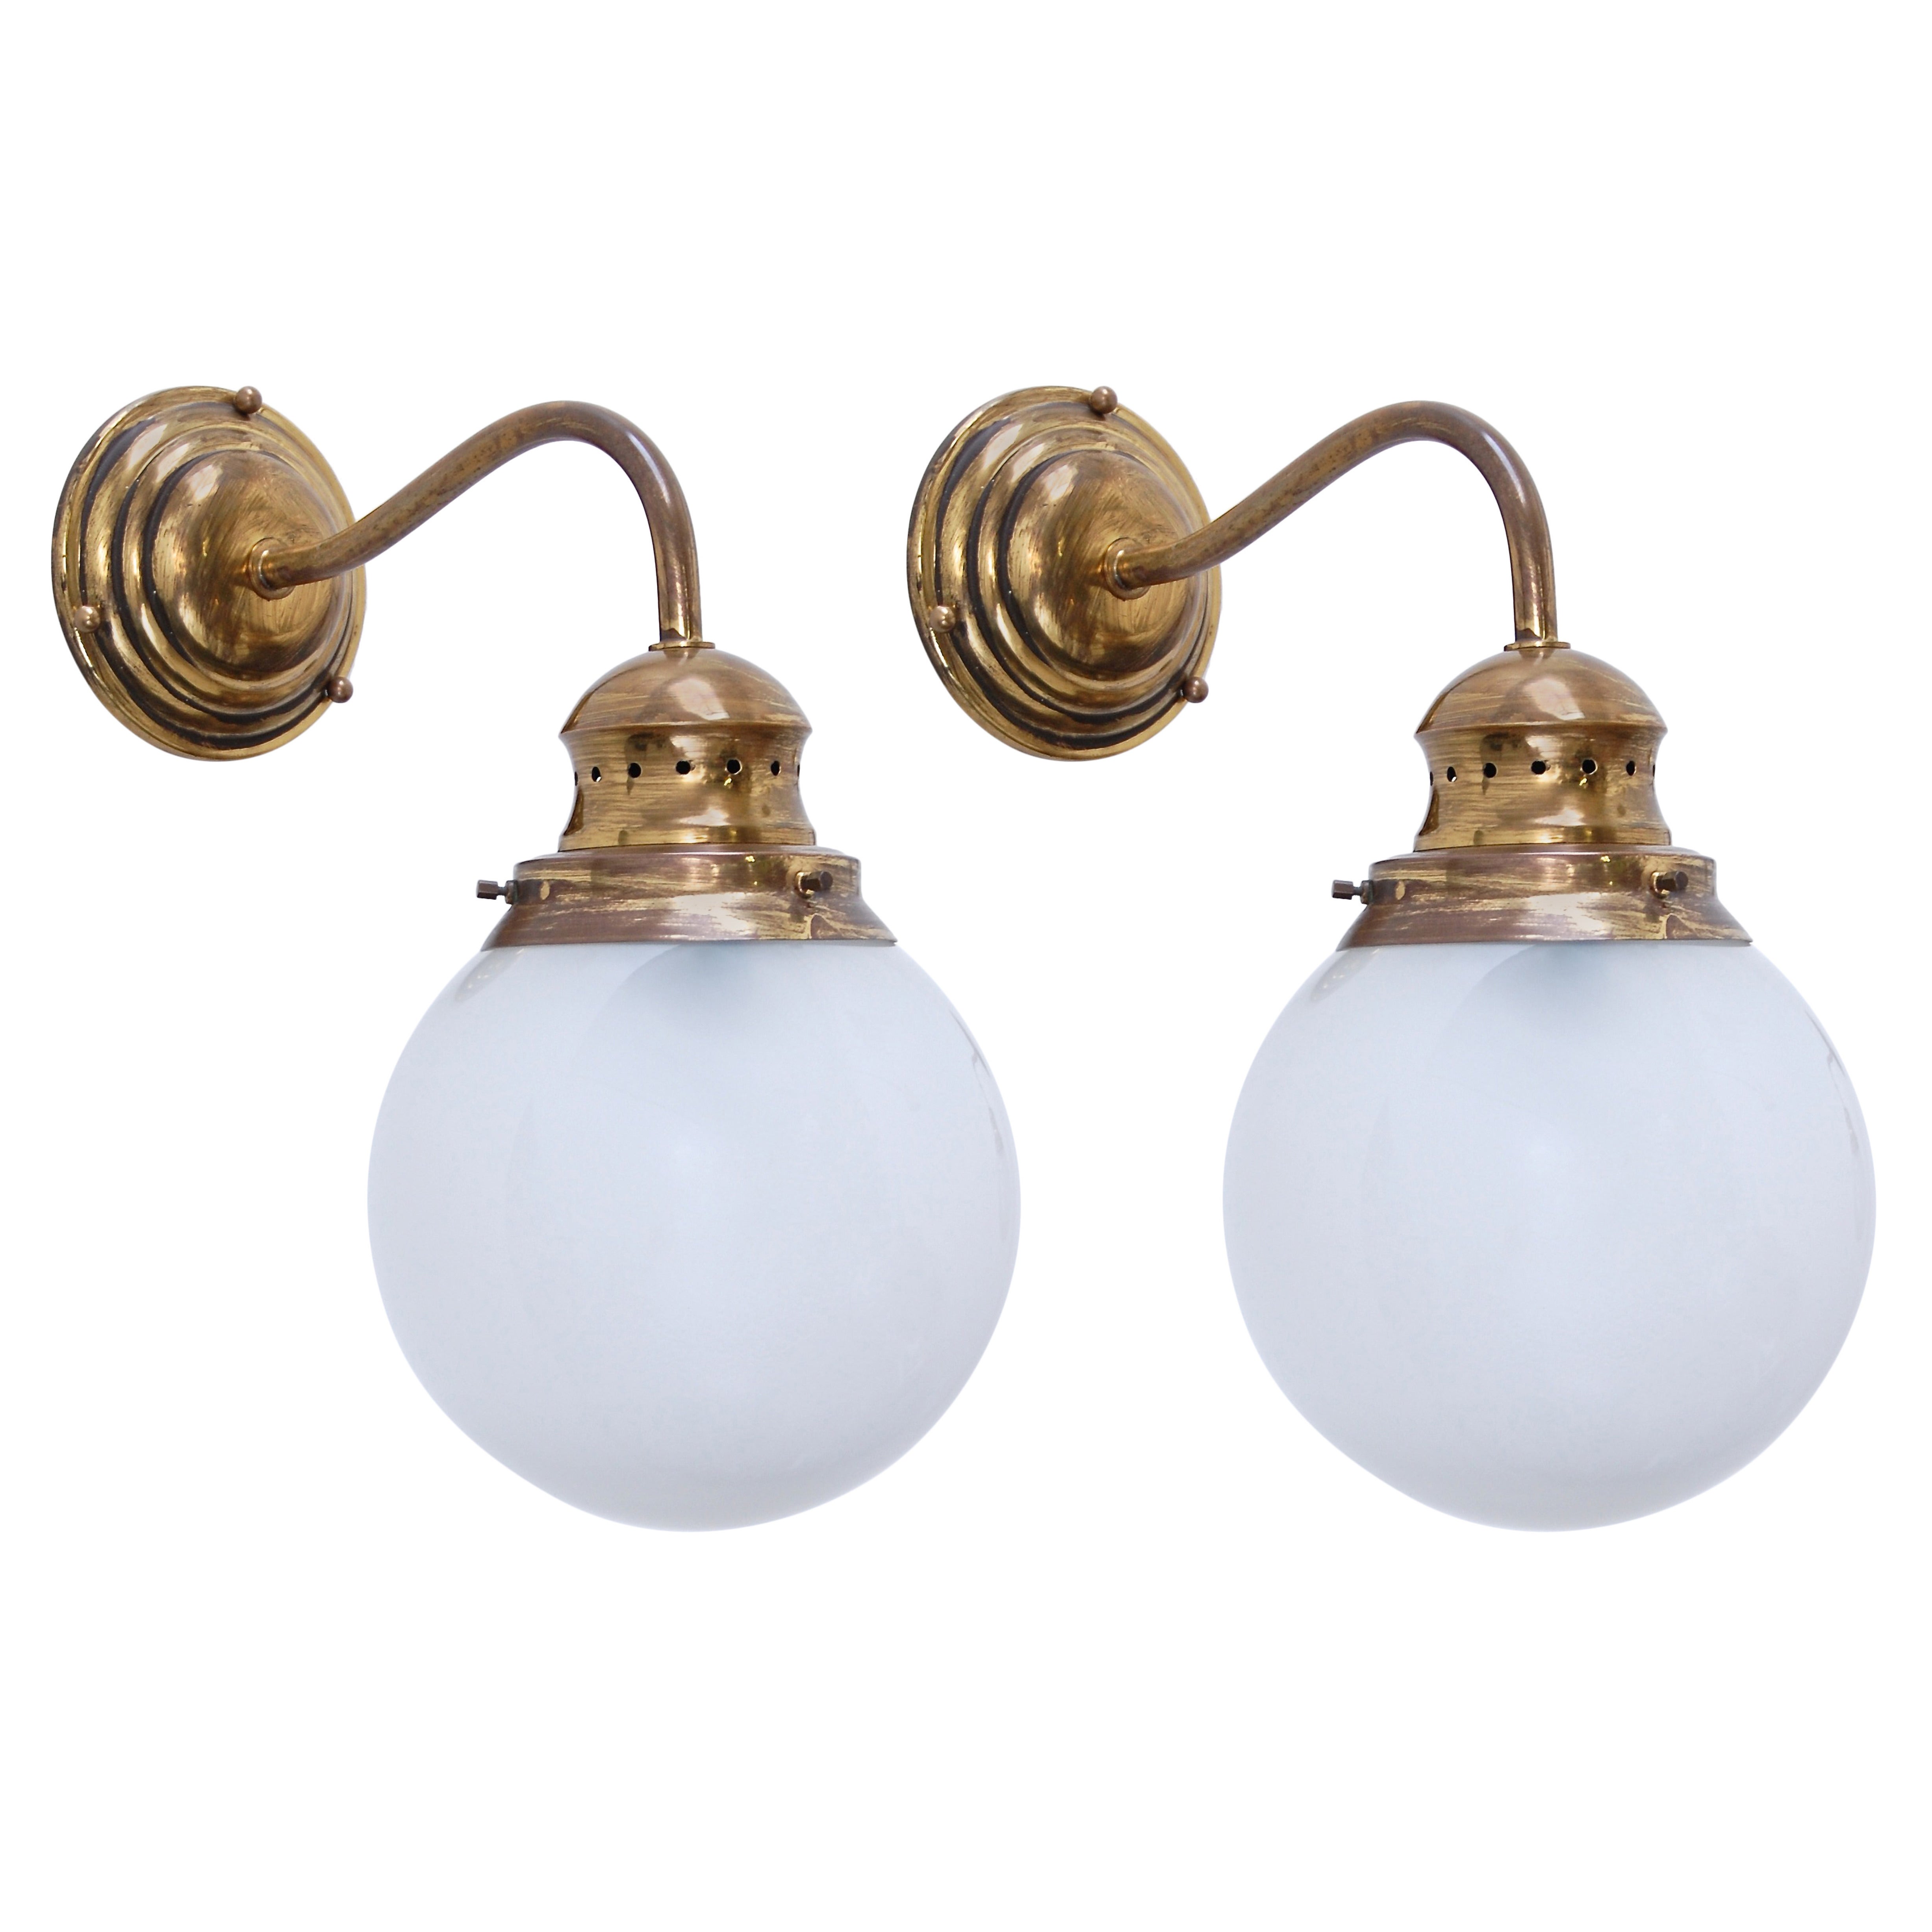 Five "LP1 Lampione" Wall Lamps by Azucena